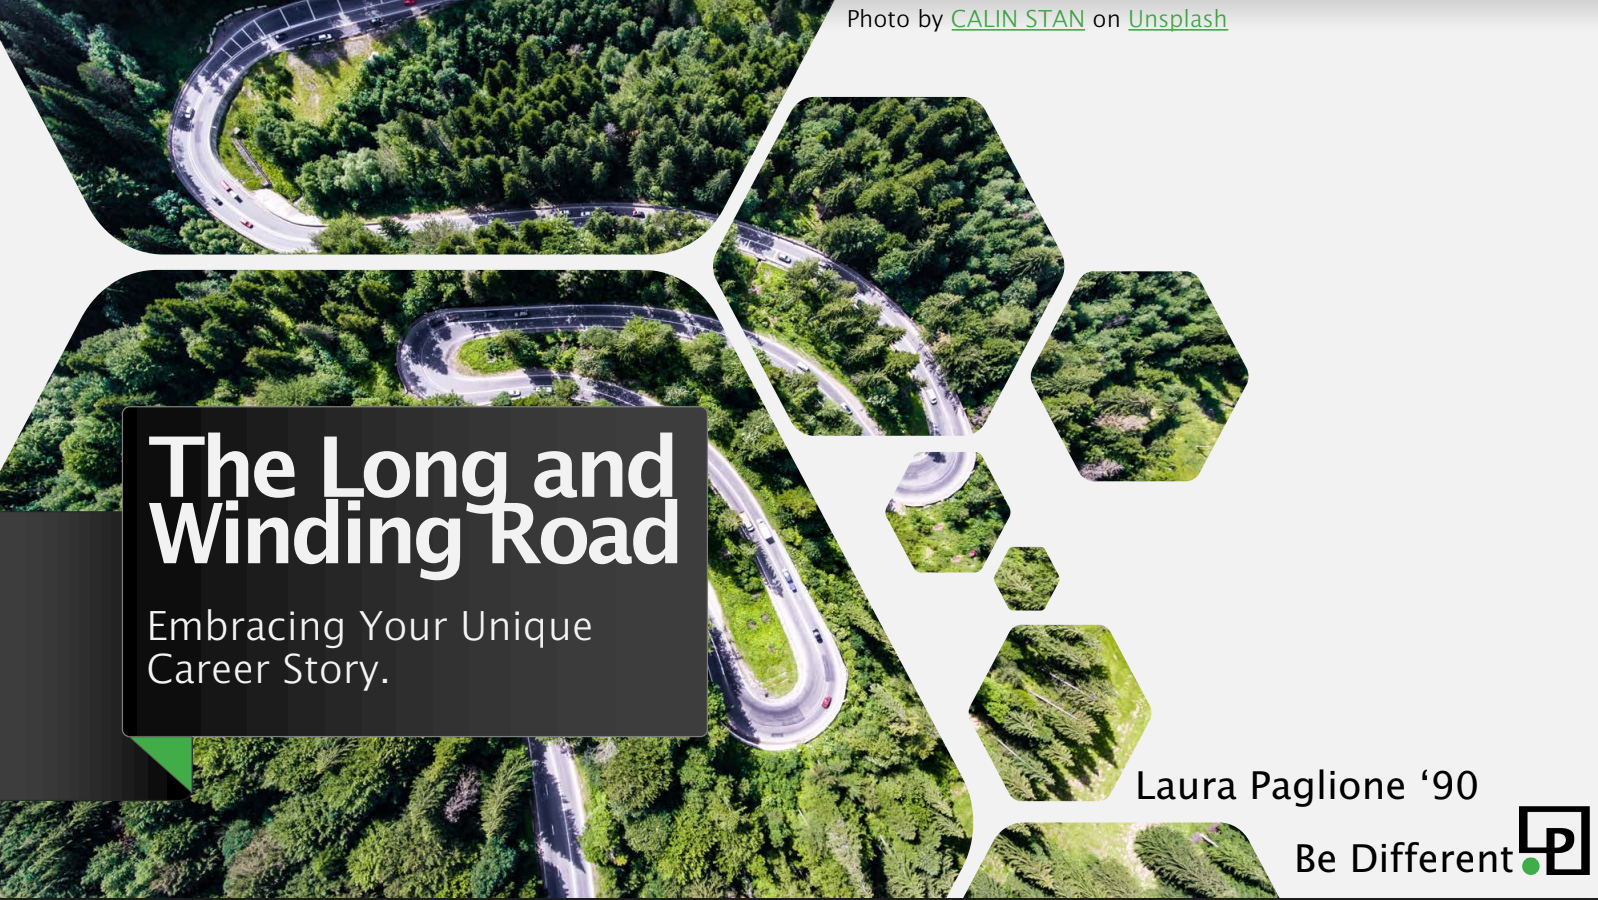 The Long and Winding Road: Embracing Your Unique Career Story